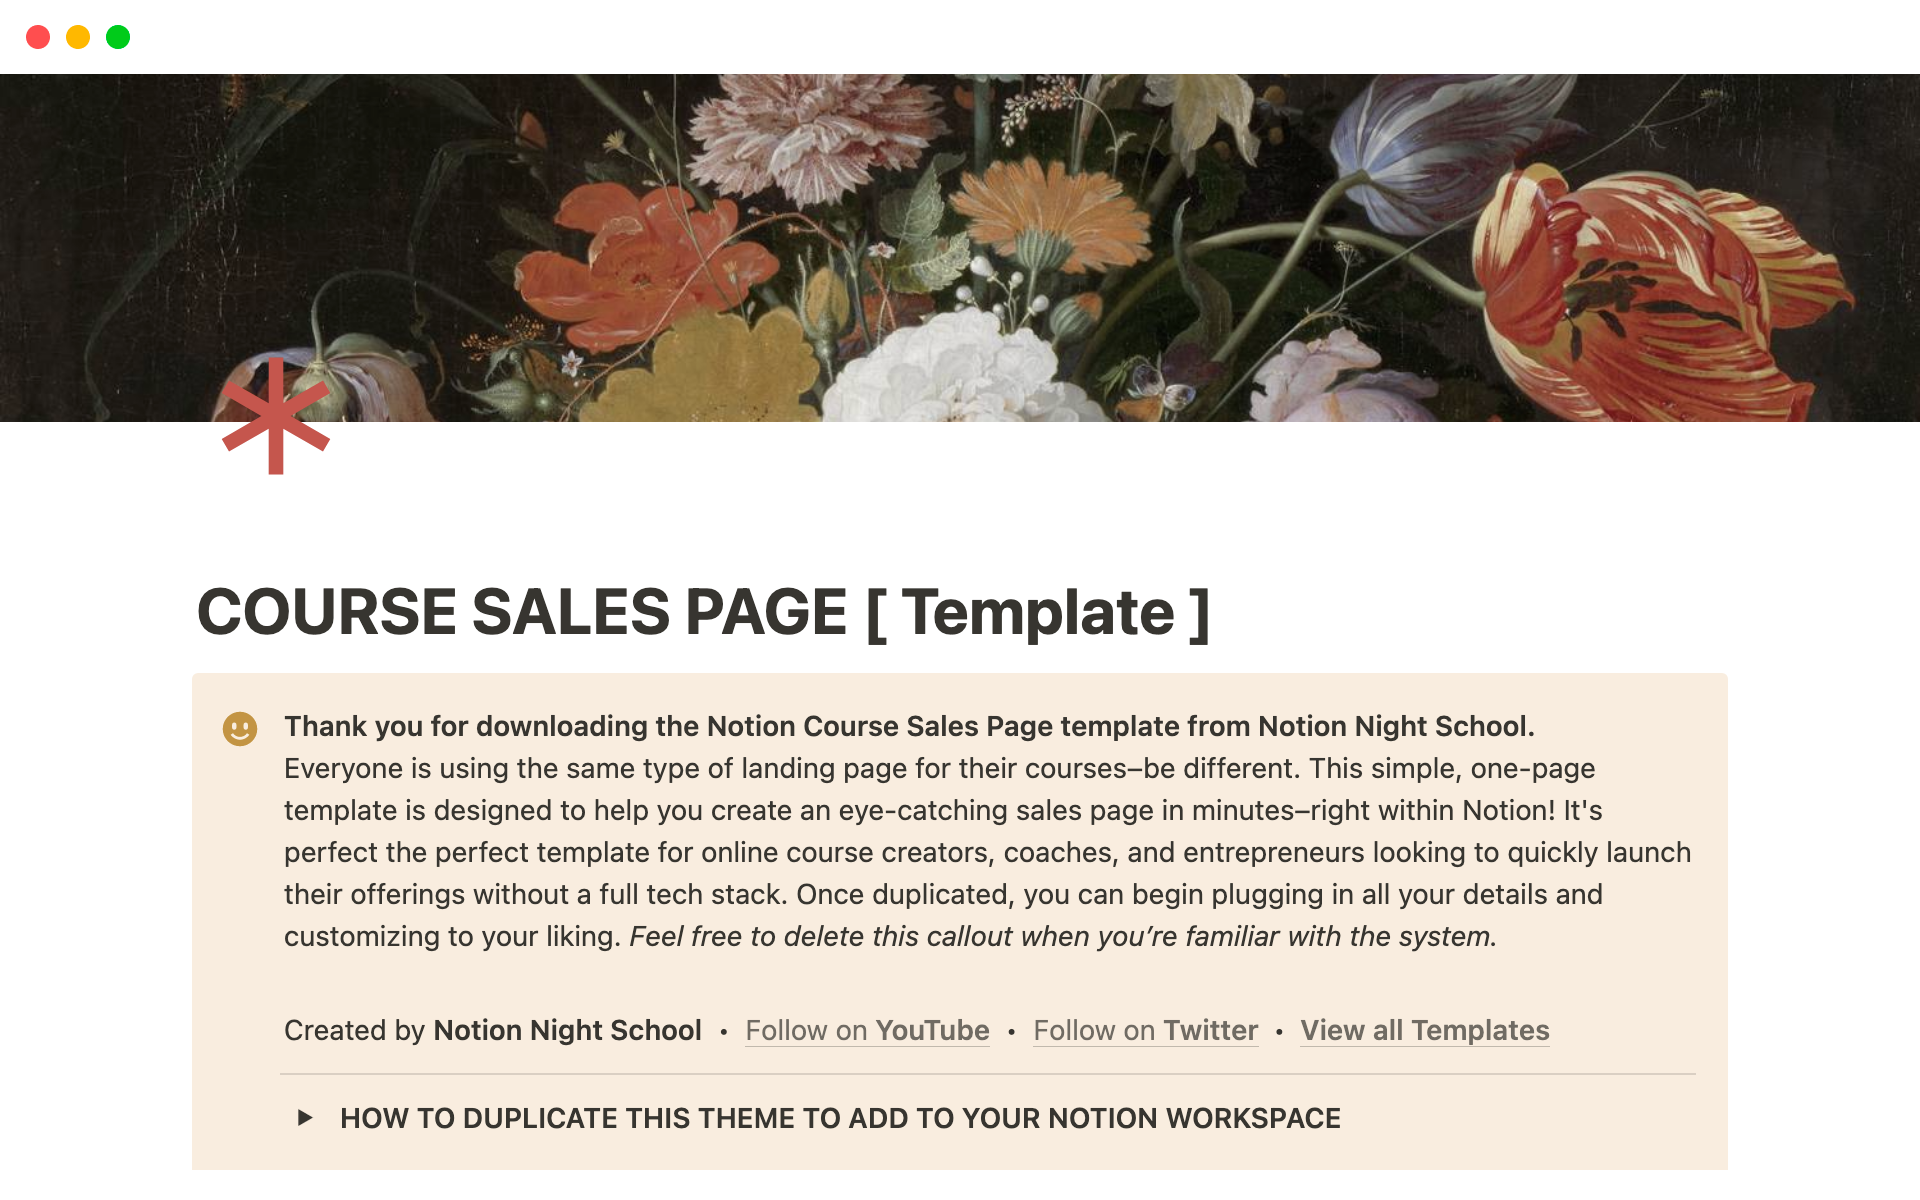 A simple, one-page template designed to help coaches & online course creators create eye-catching sales page in minutes.